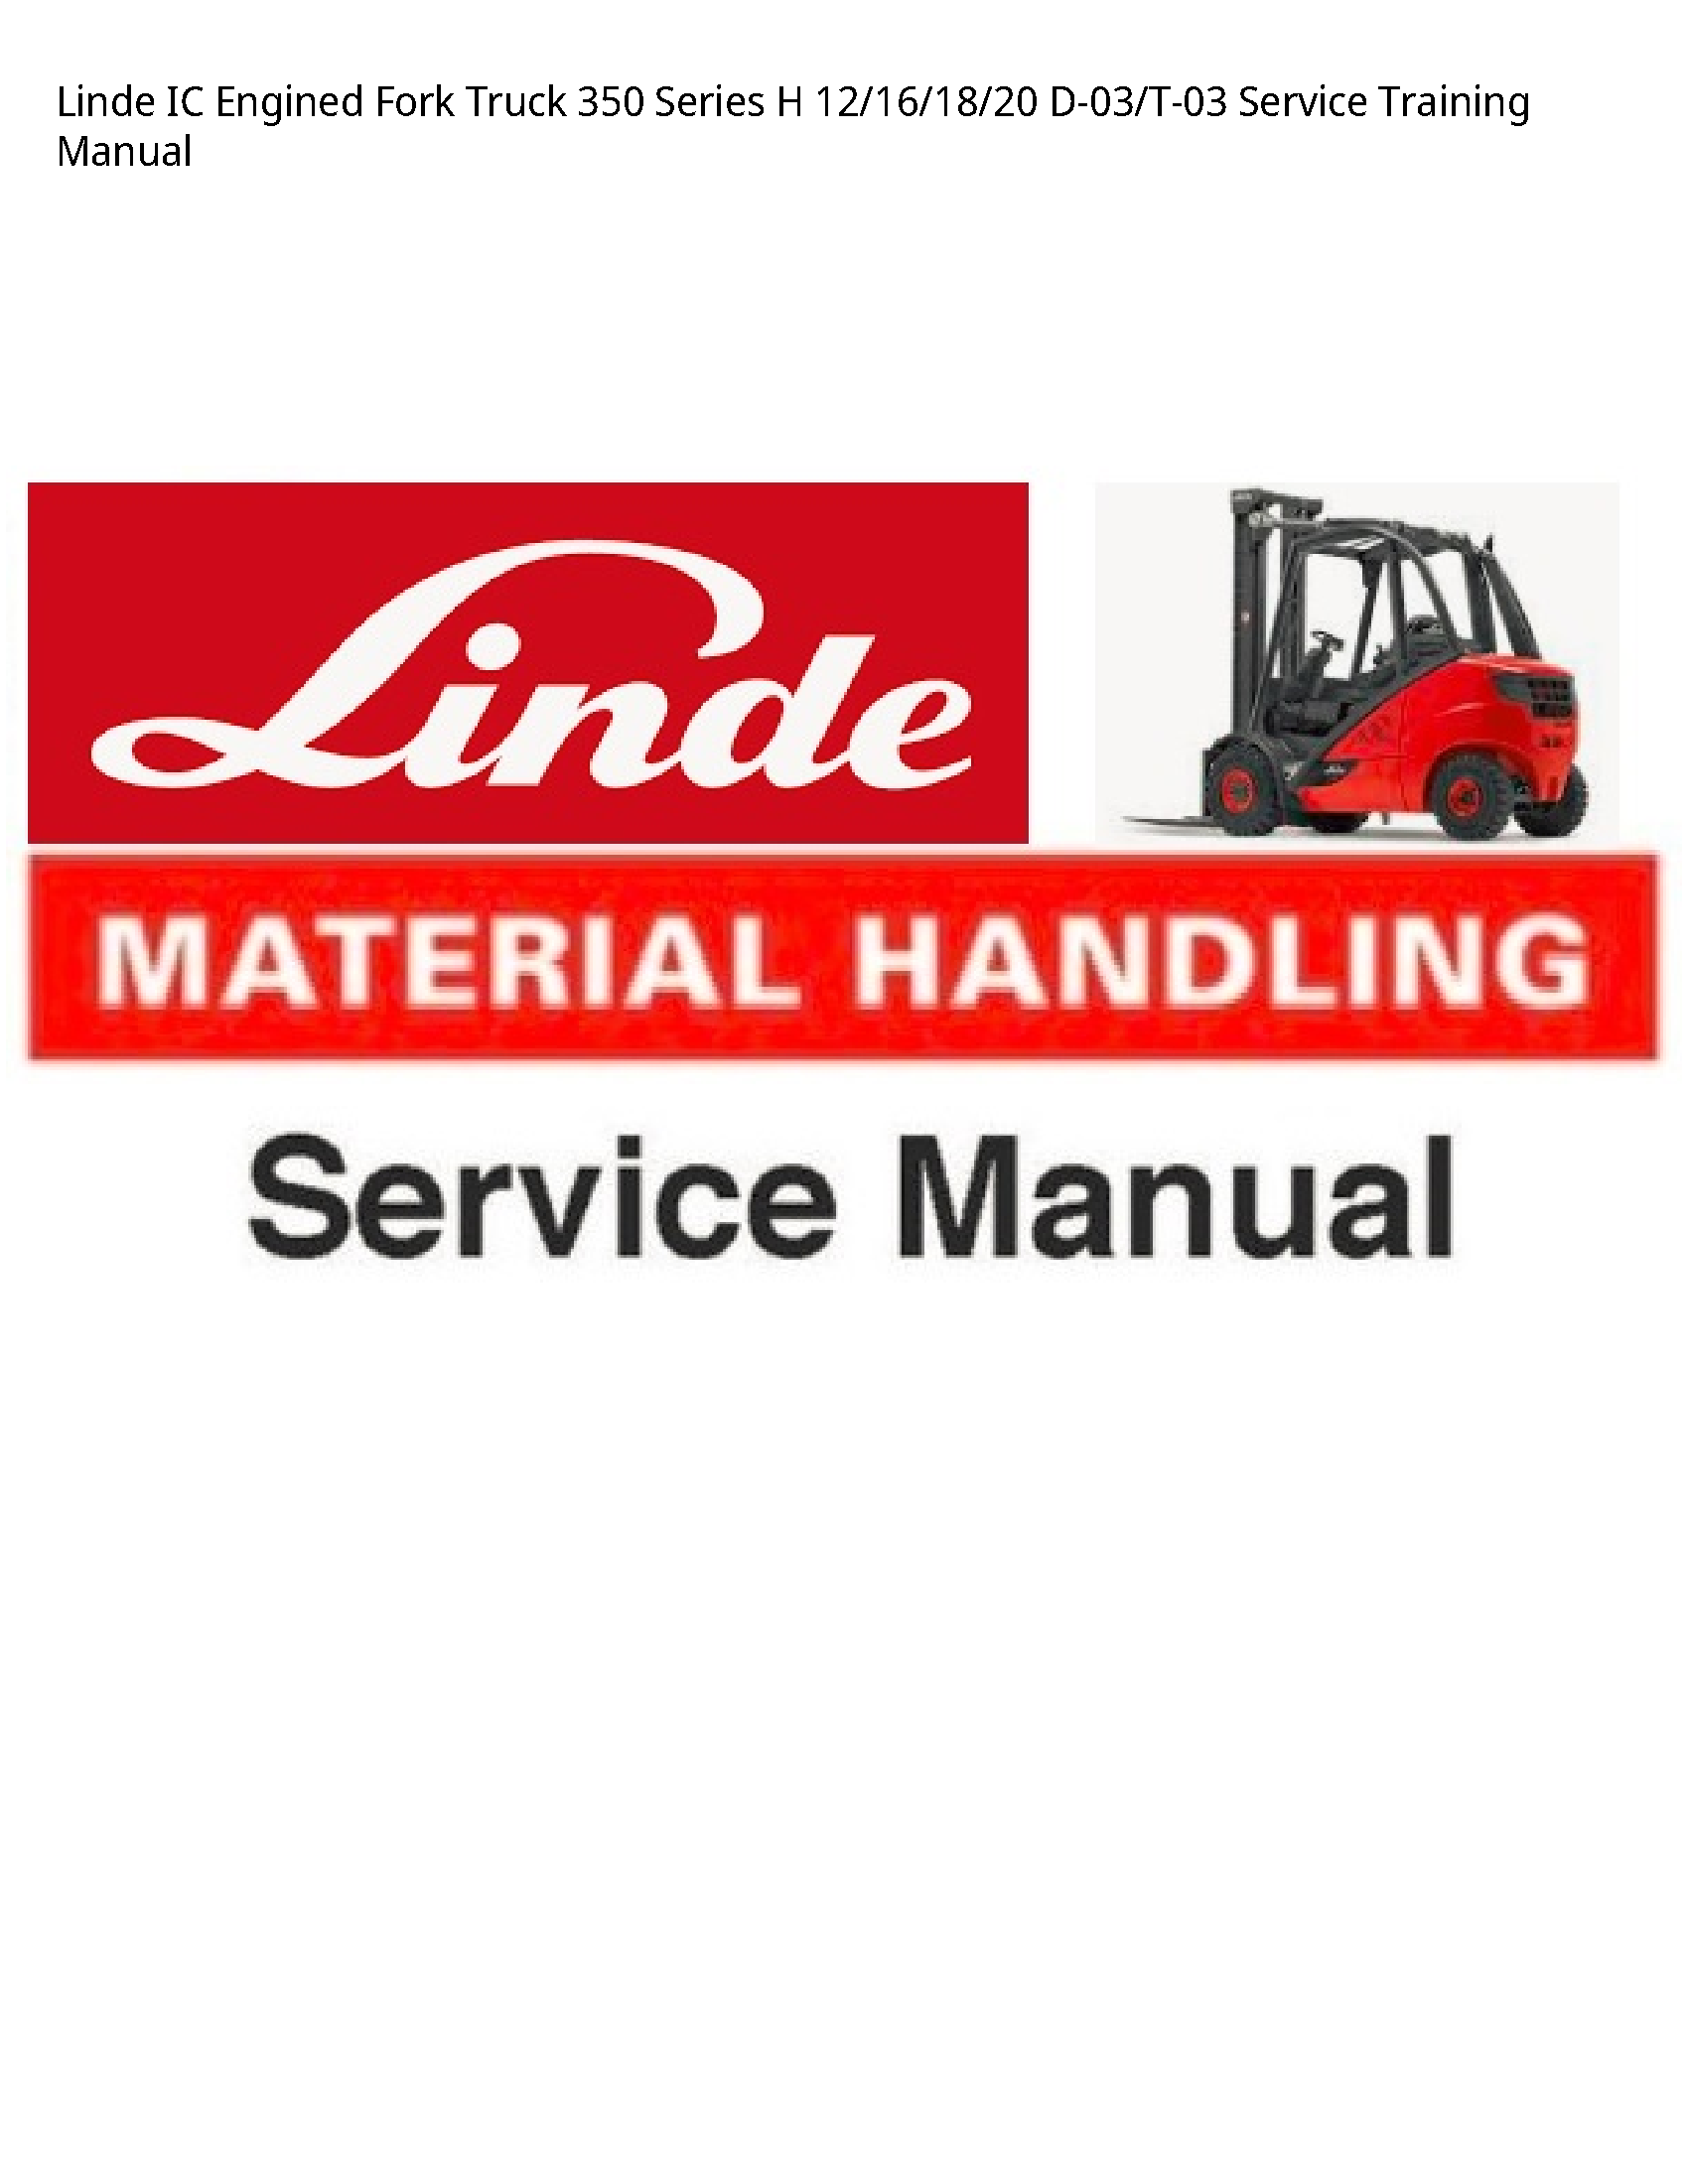 Linde 350 IC Engined Fork Truck Series Service Training manual